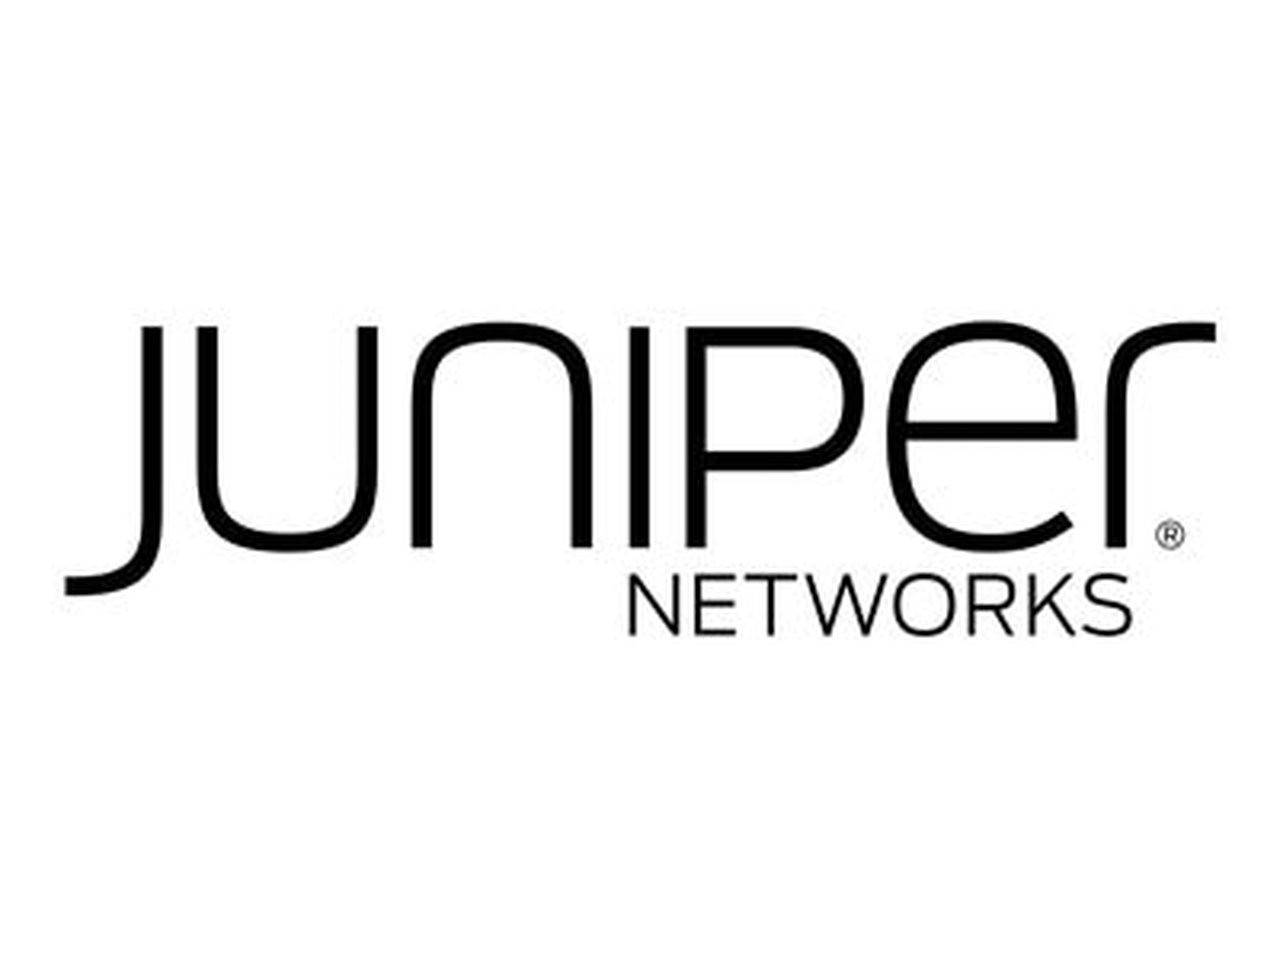 Juniper Software license allows the end user to run NAT on one NPU per MS-MIC, MS-DPC or MS-MPC in the MX-series routers.